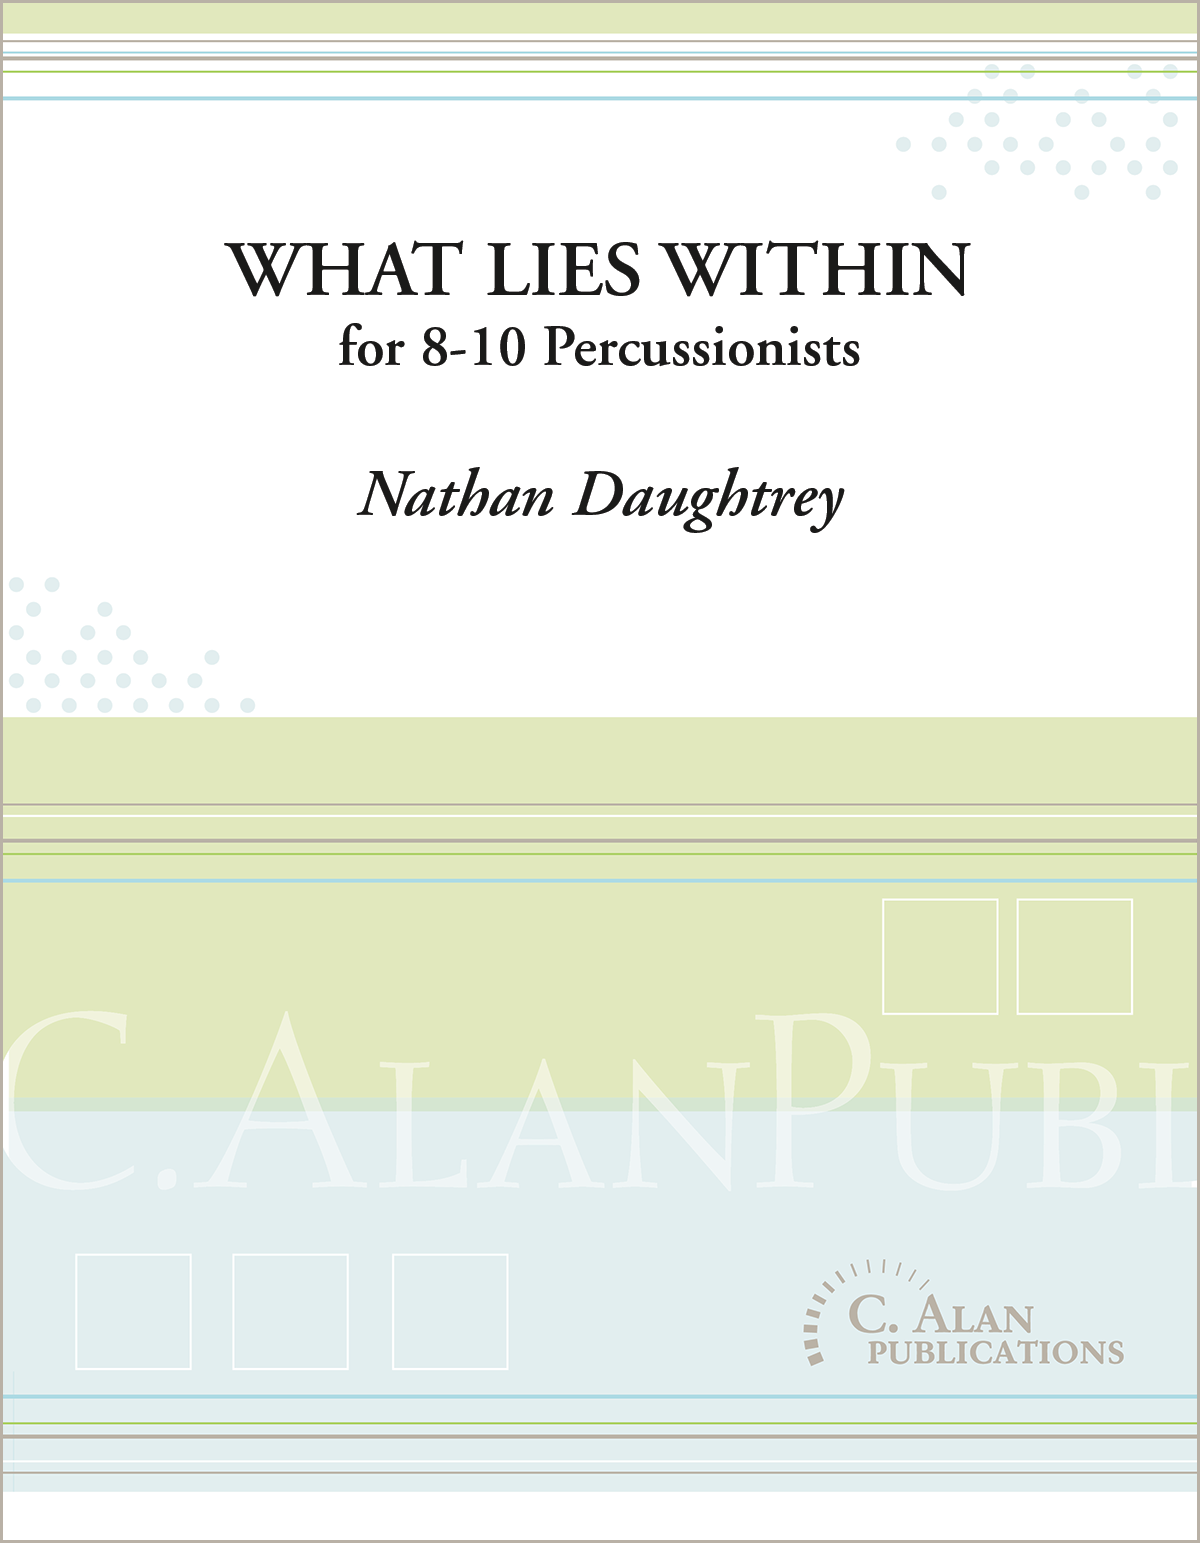 What-Lies-Within | Daughtrey, Nathan